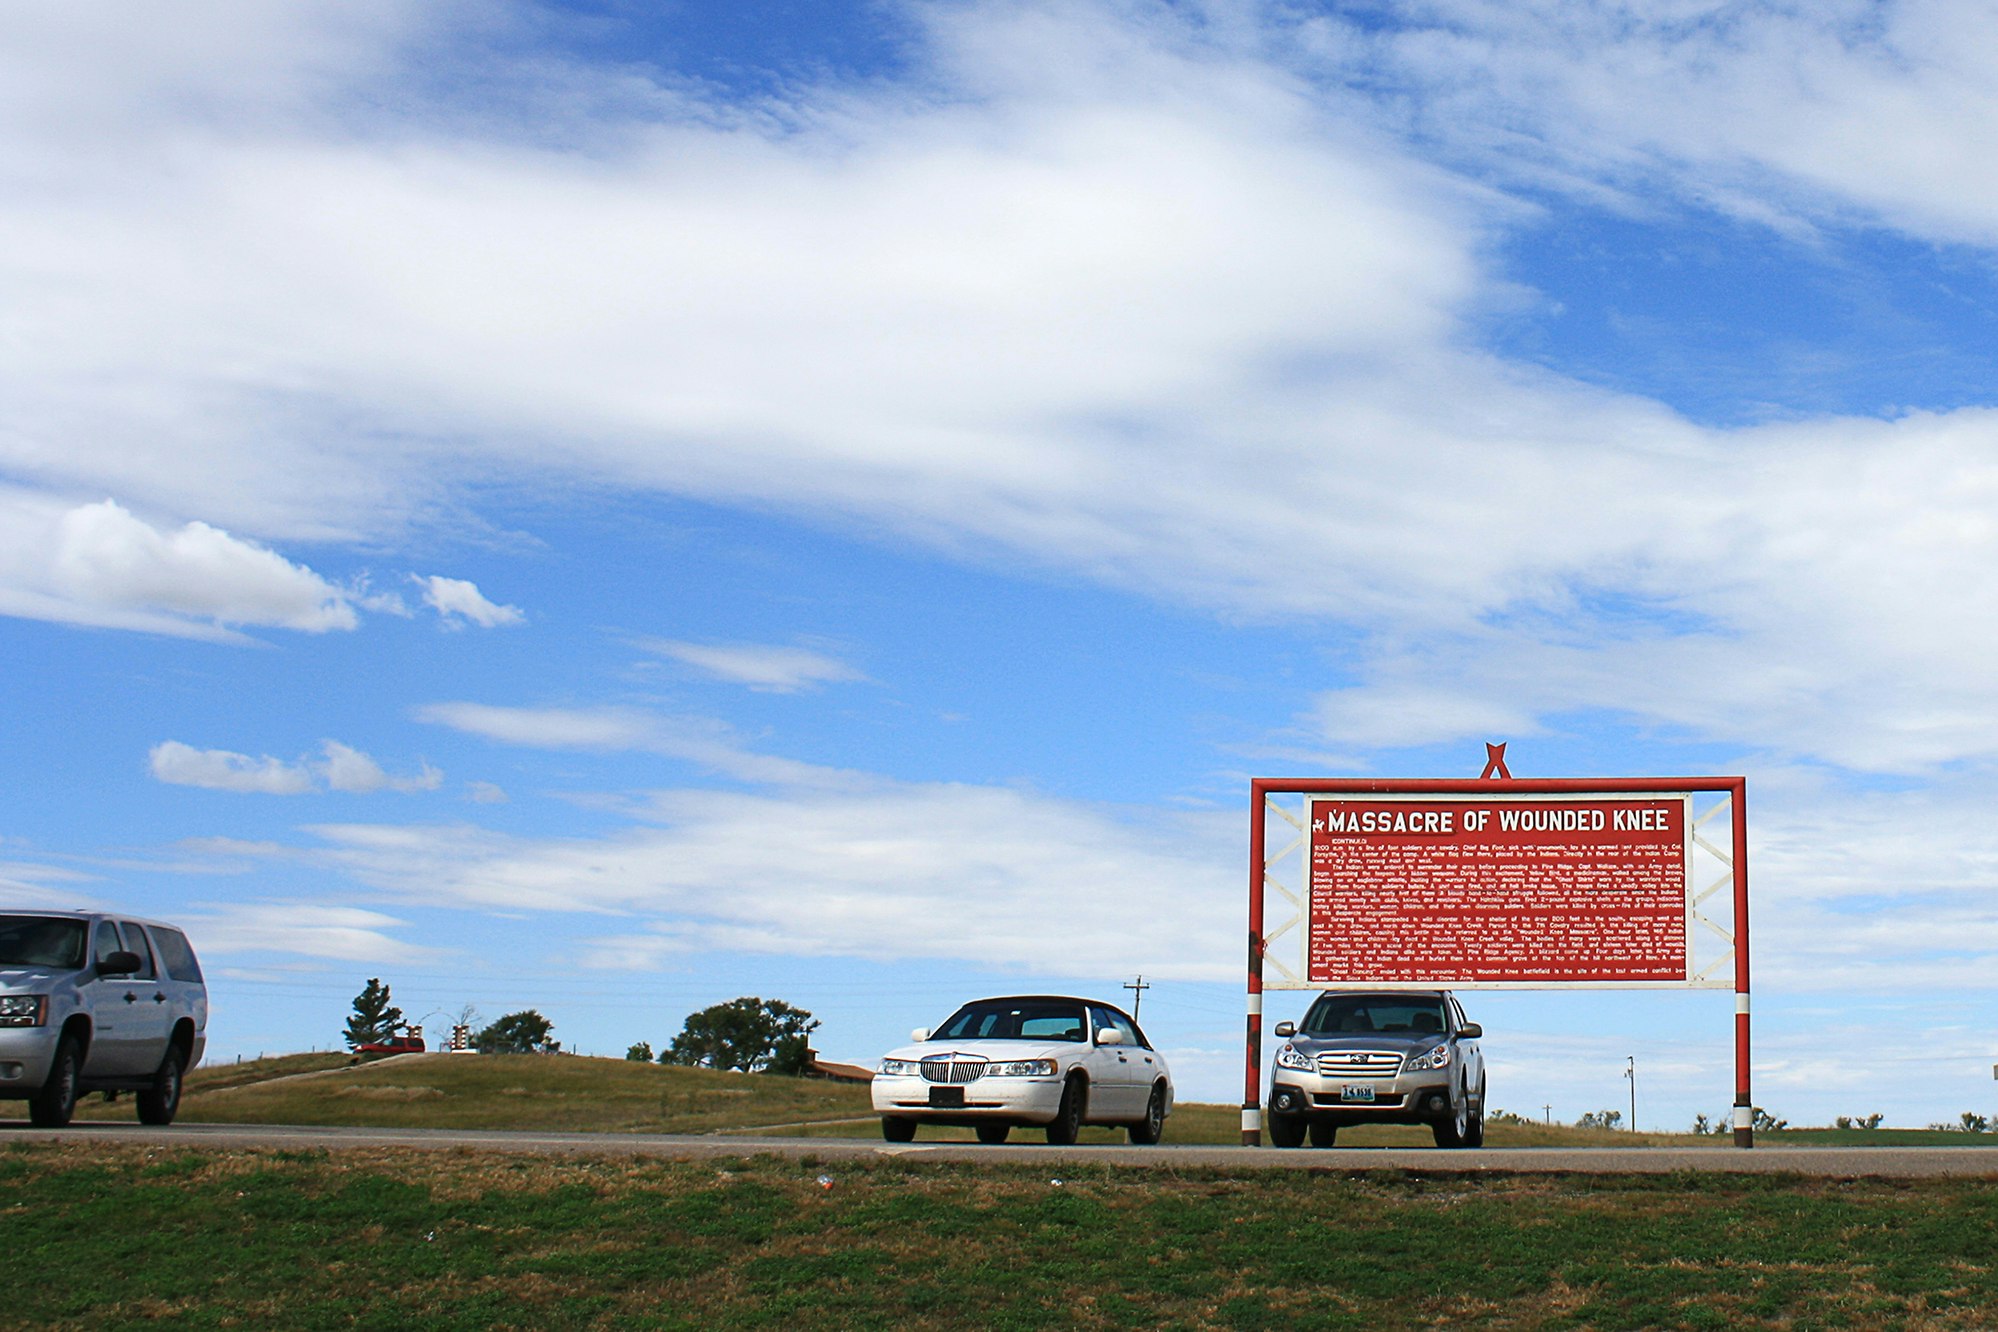 The Massacre of Wounded Knee site. Image by Alexander Howard / Lonely Planet